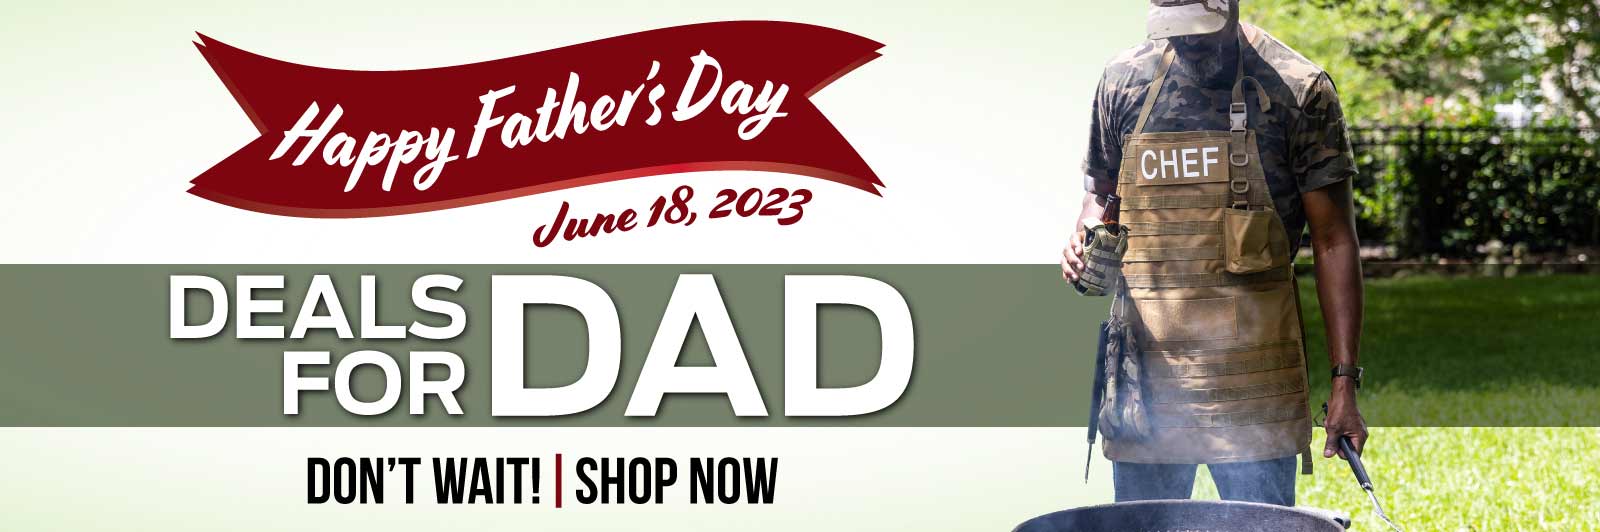 Deals Father's Day